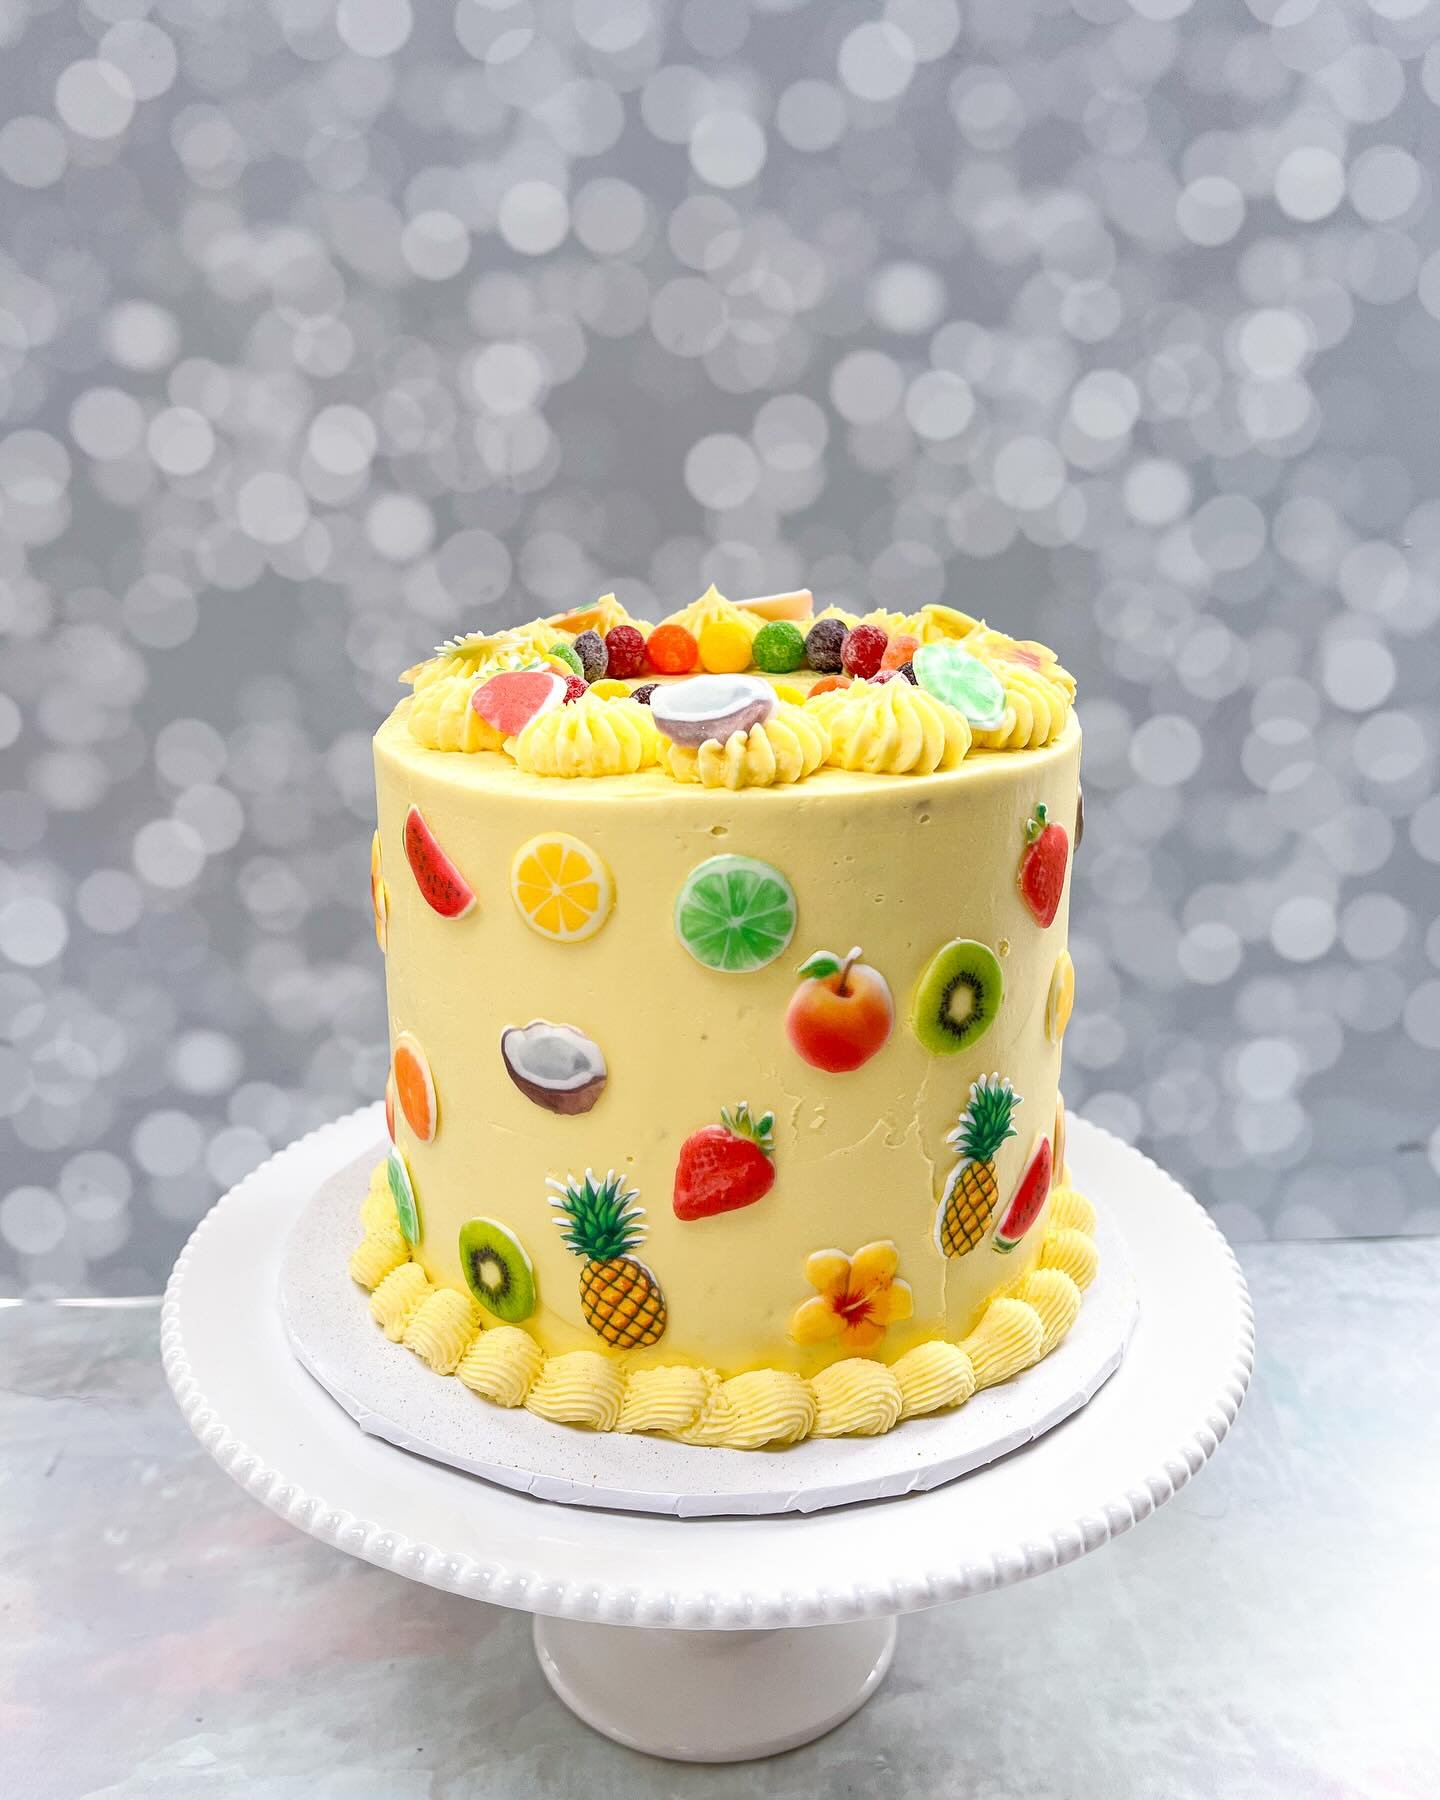 🍋 🍋&zwj;🟩 🍊 🍍 🍓 🥝 🥥

Happy 10th Birthday to my oldest kiddo!  She is VERY into themed birthdays, and this year was no exception. 

A fun fruit-themed cake was her request.  I made little fruit royal icing transfers to add around the cake, and